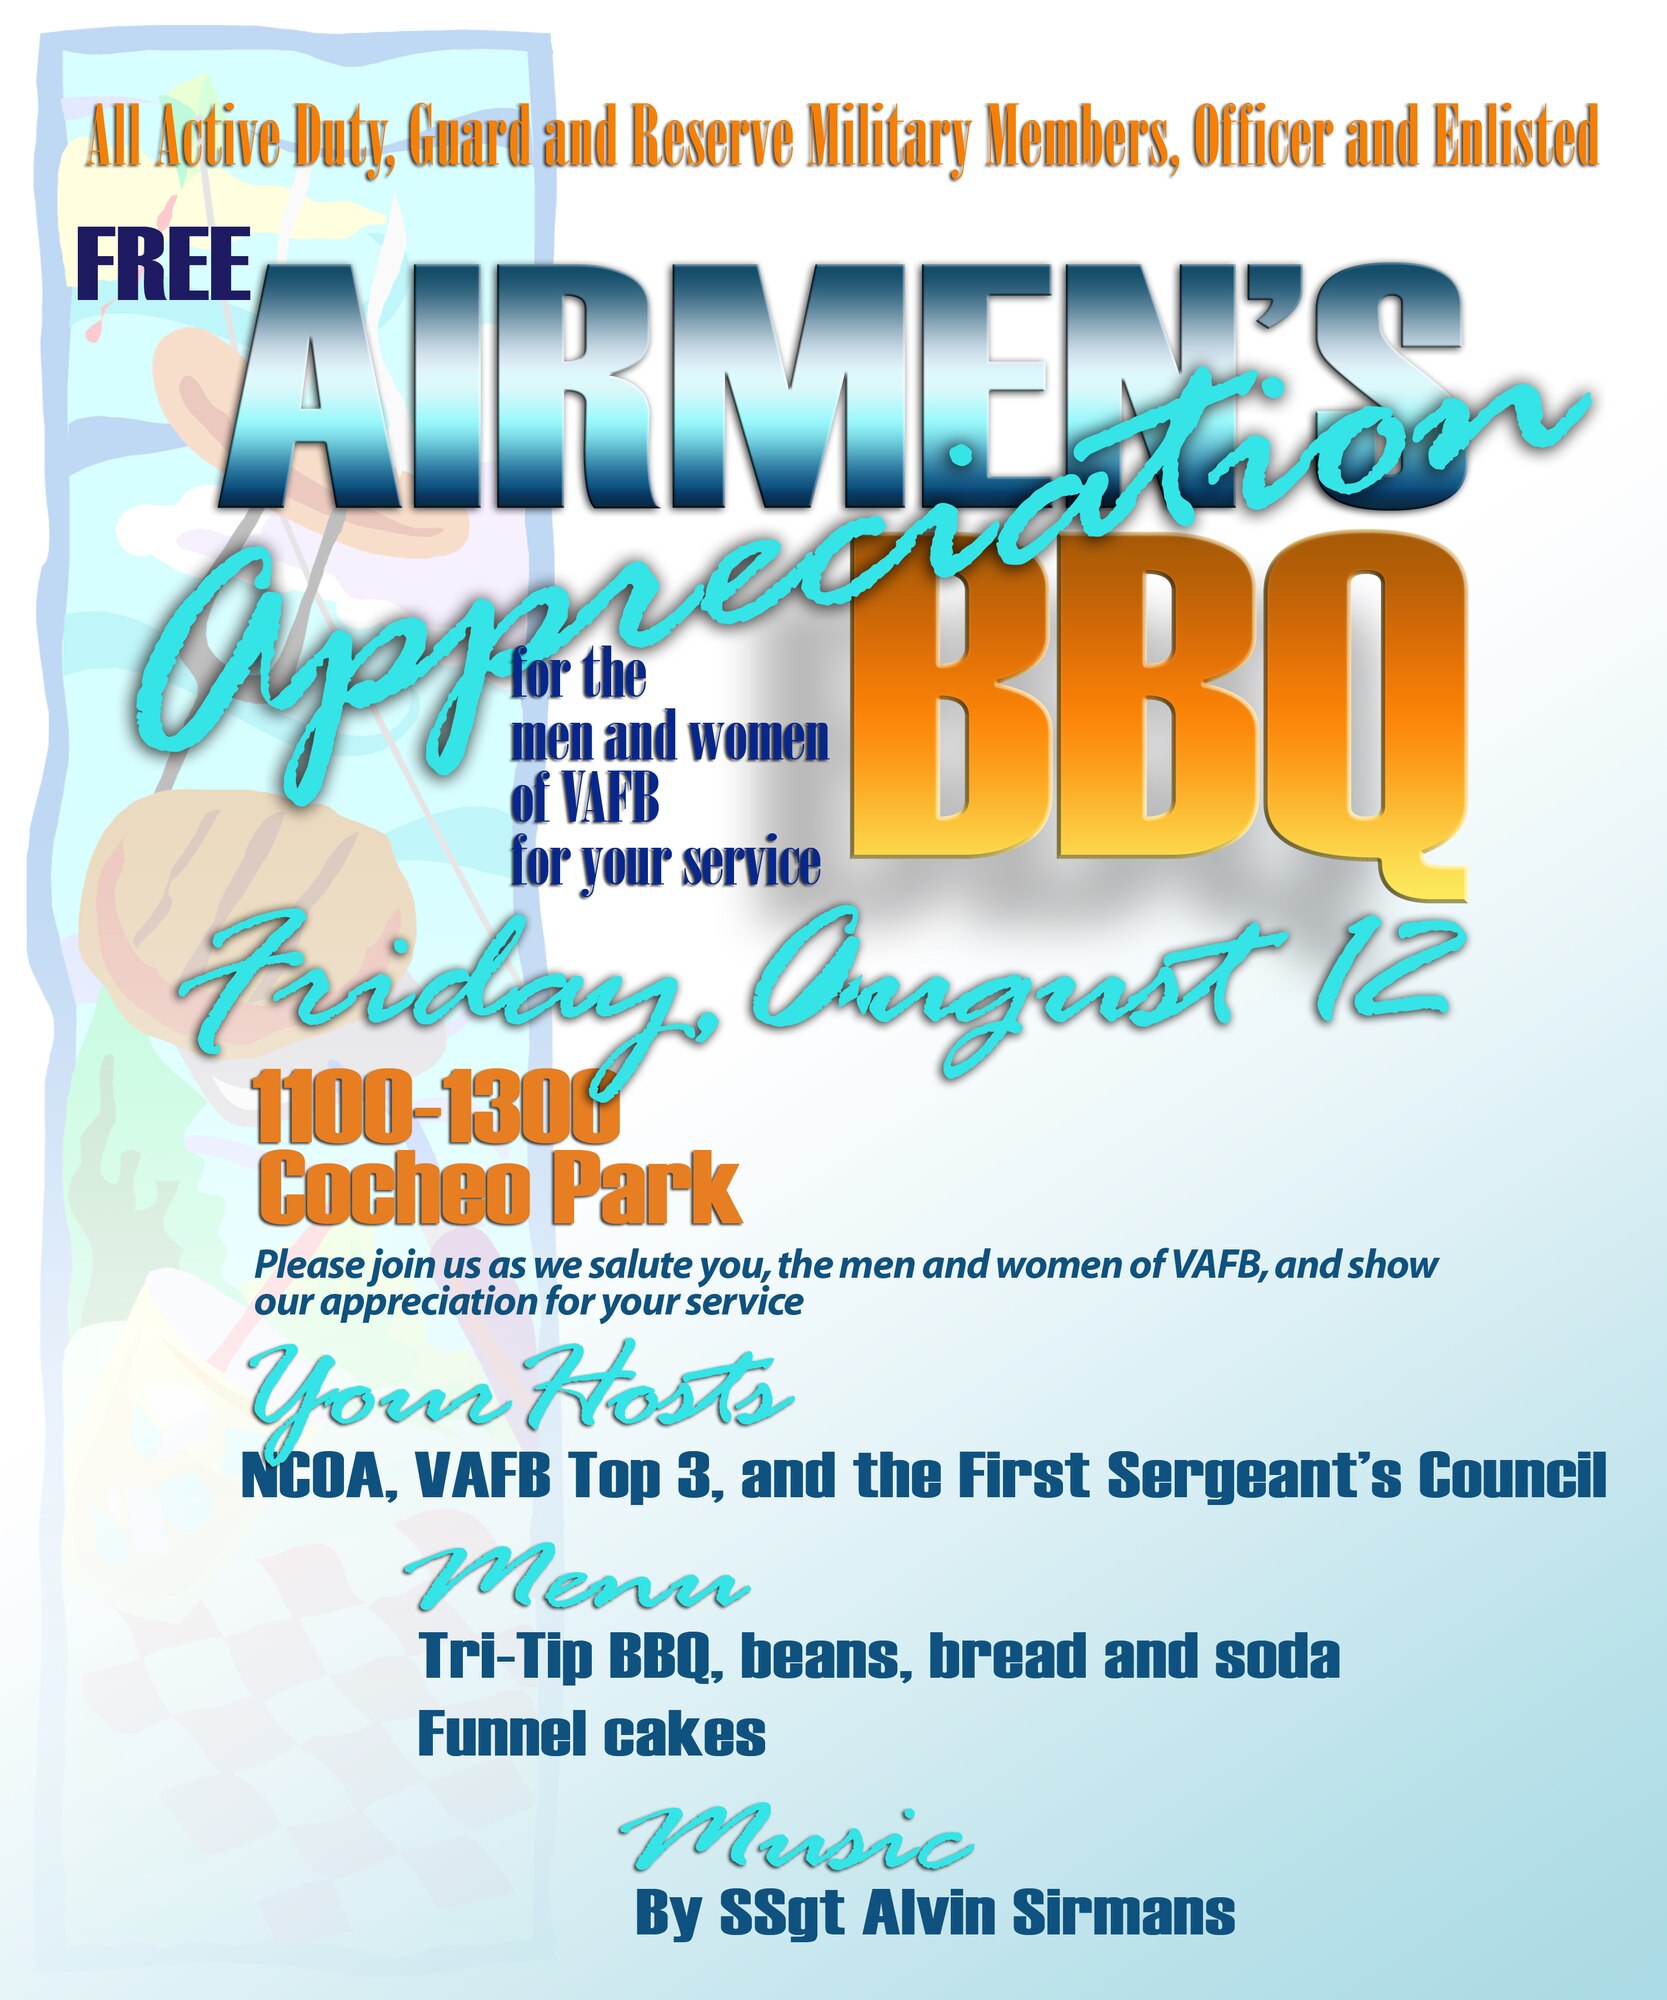 VANDENBERG AIR FORCE BASE, Calif.--The Lompoc Chamber of Commerce is scheduled to host the annual Airmen’s Appreciation Barbecue at Cocheo Park here from 11 a.m. to 1 p.m. Friday, Aug. 12, 2011.  The barbecue is free to all military members and family members of deployed personnel. (Courtesy graphic)